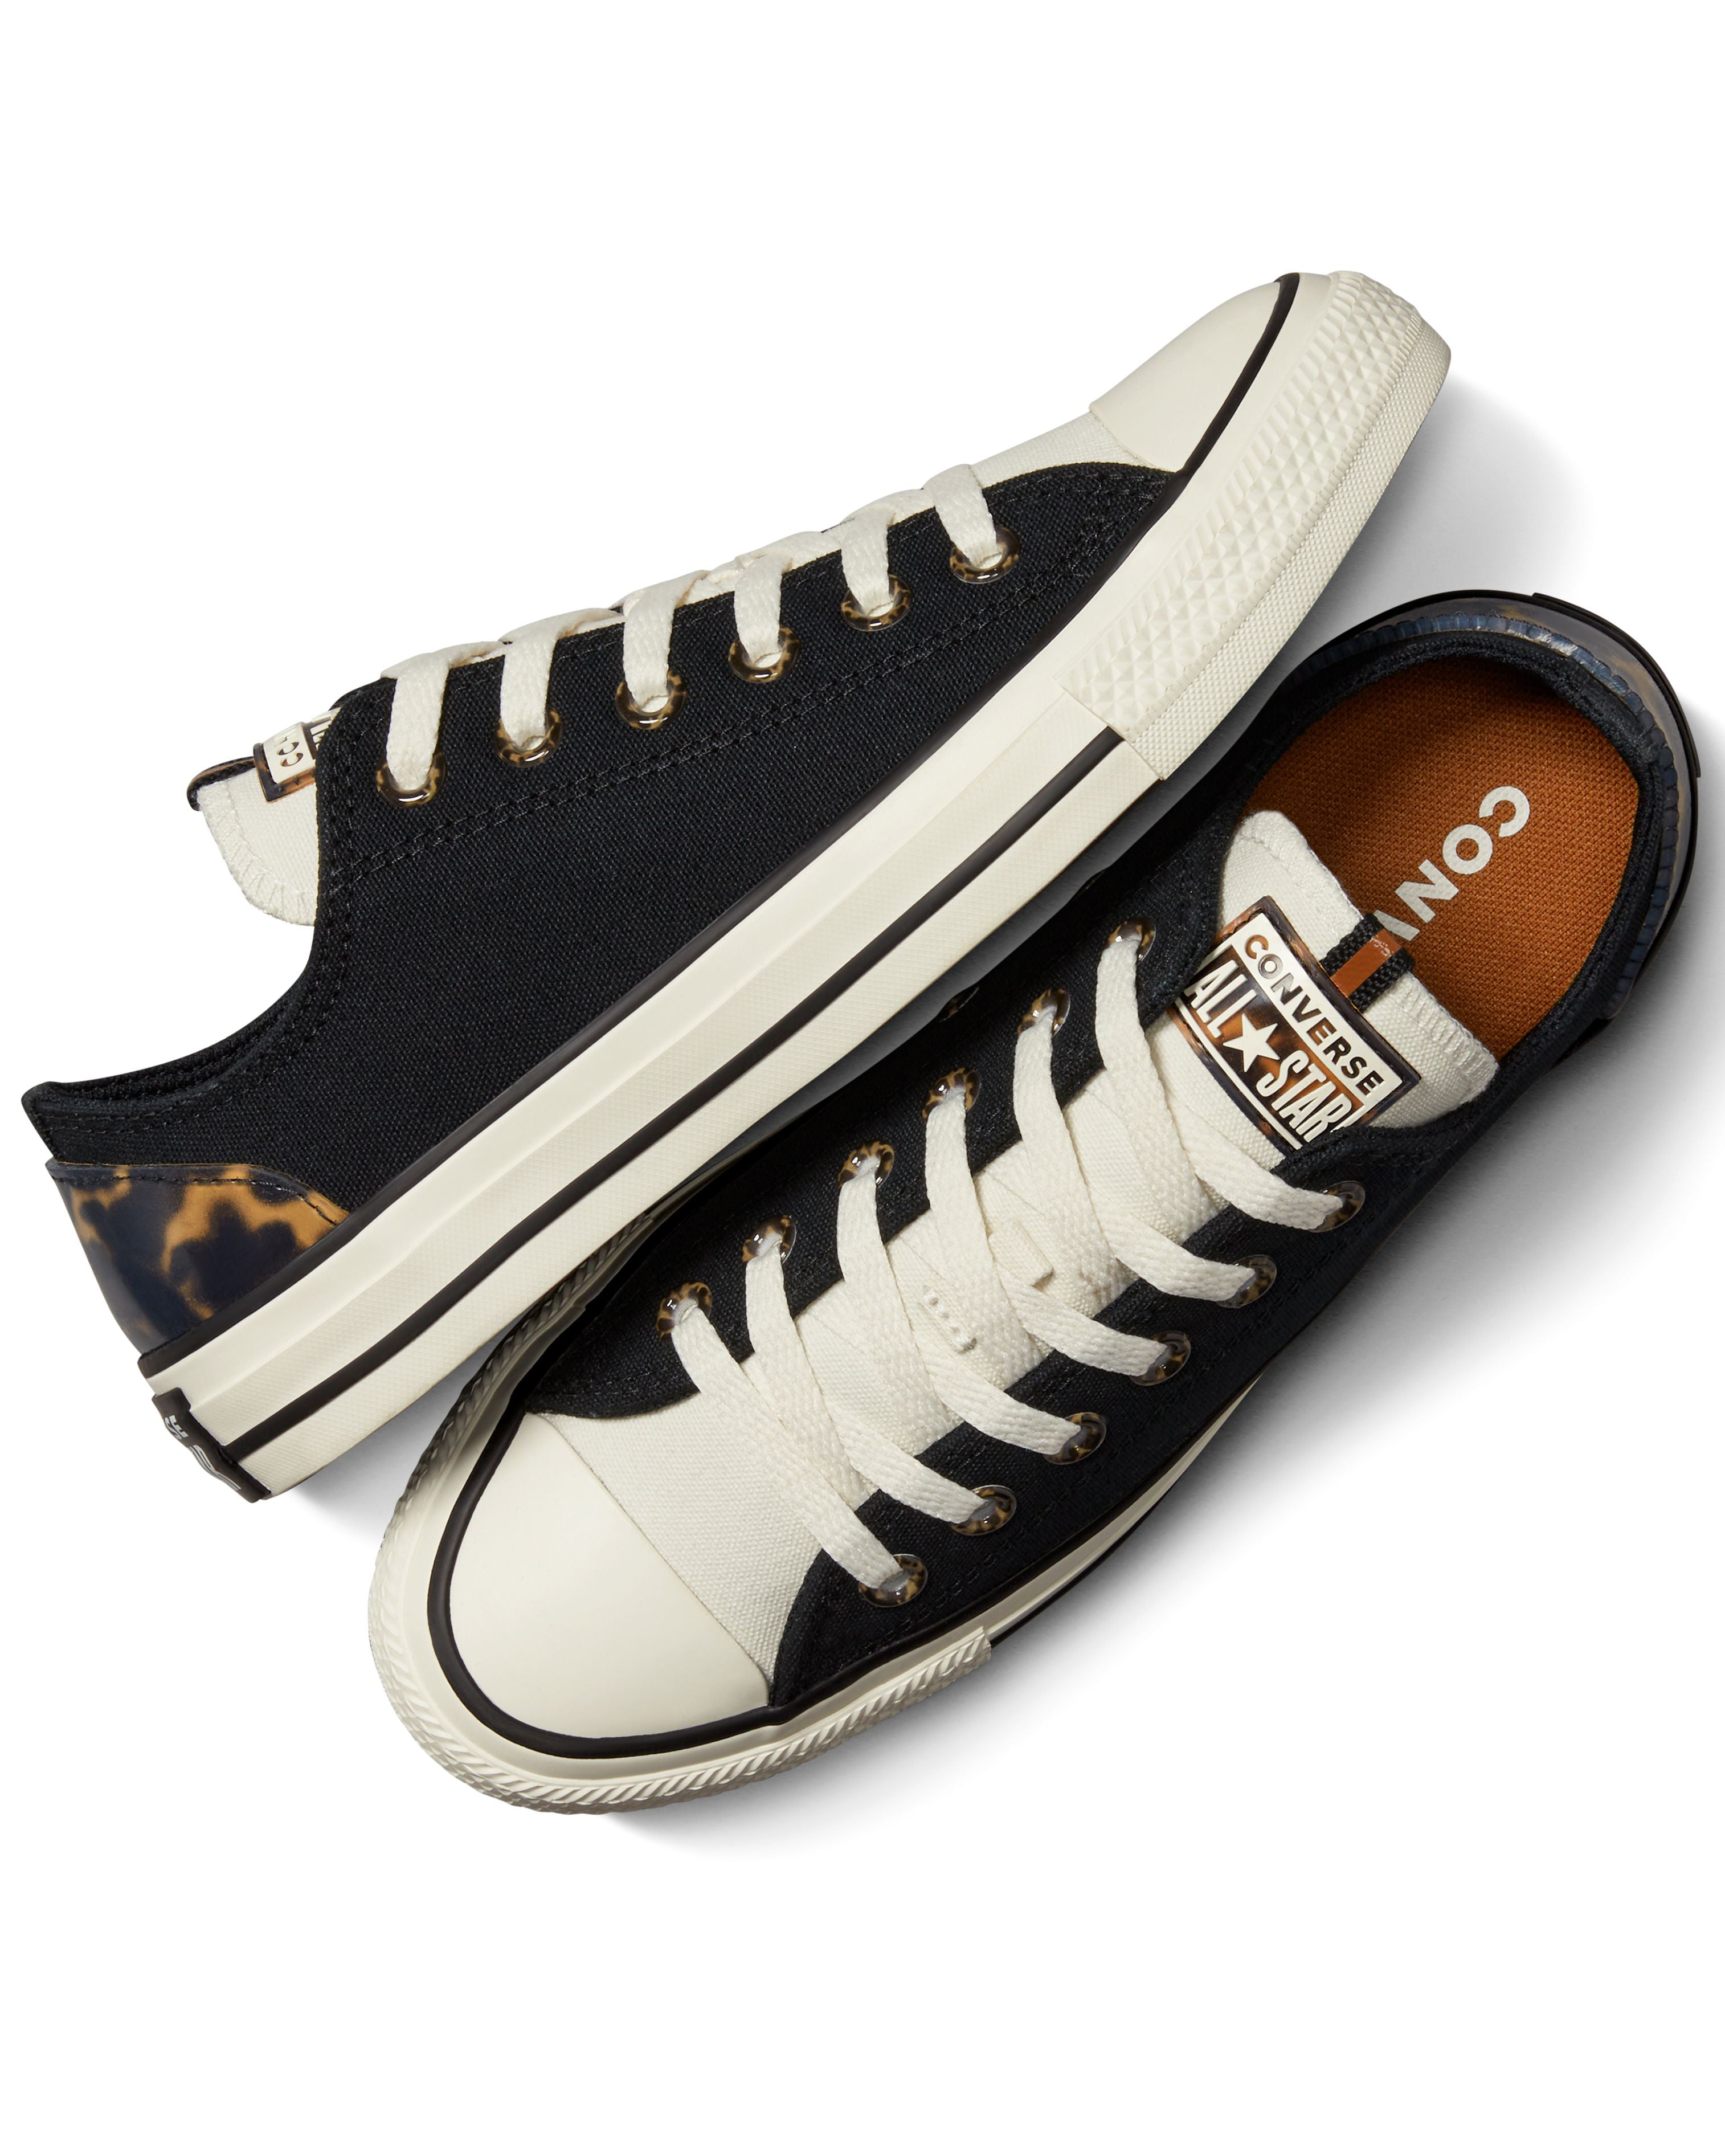 Converse Chuck Taylor Future Archive High Low - Black/Egret/Tawny Owl